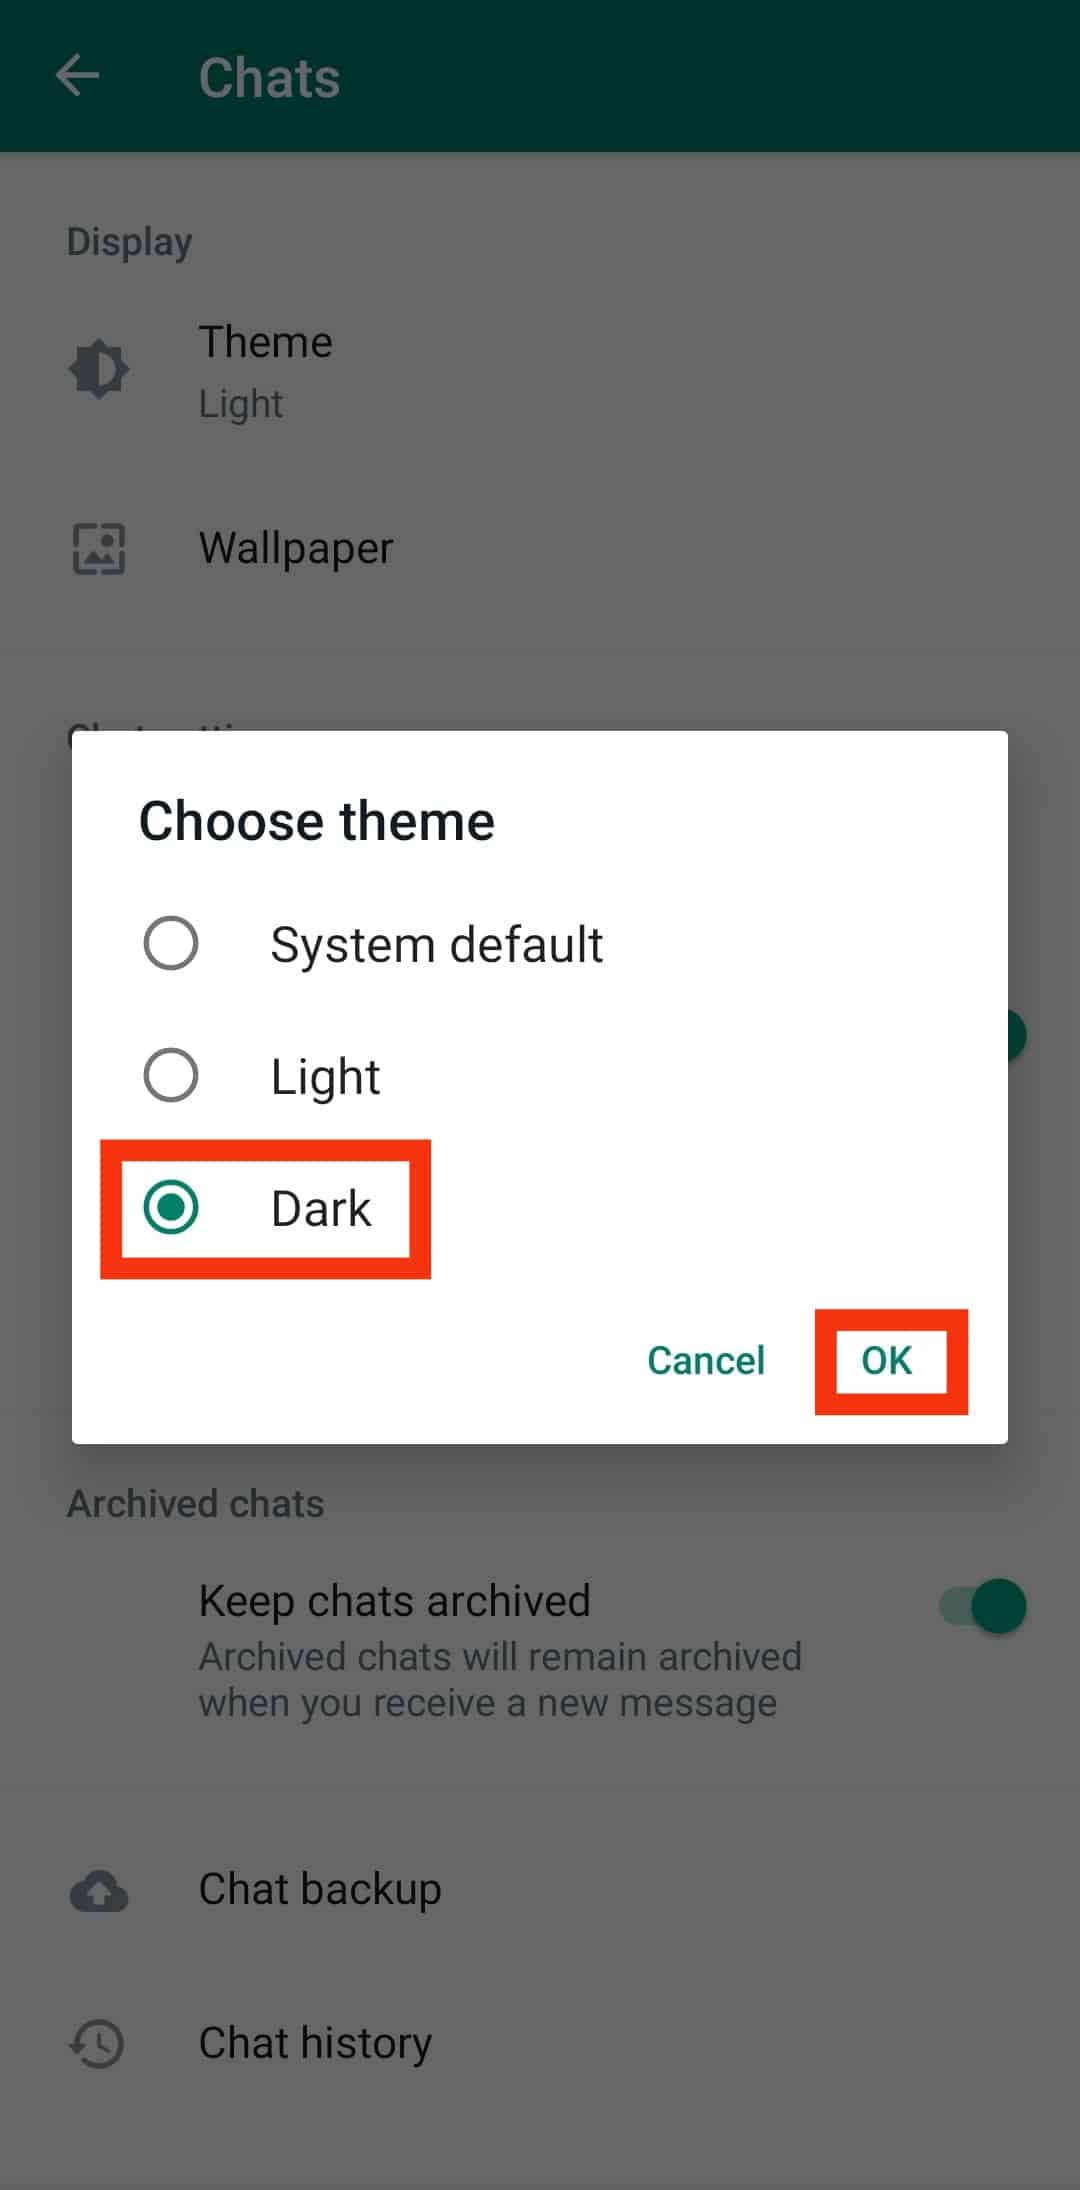 Tap On The 'Dark' Option And Then Tap 'Ok'